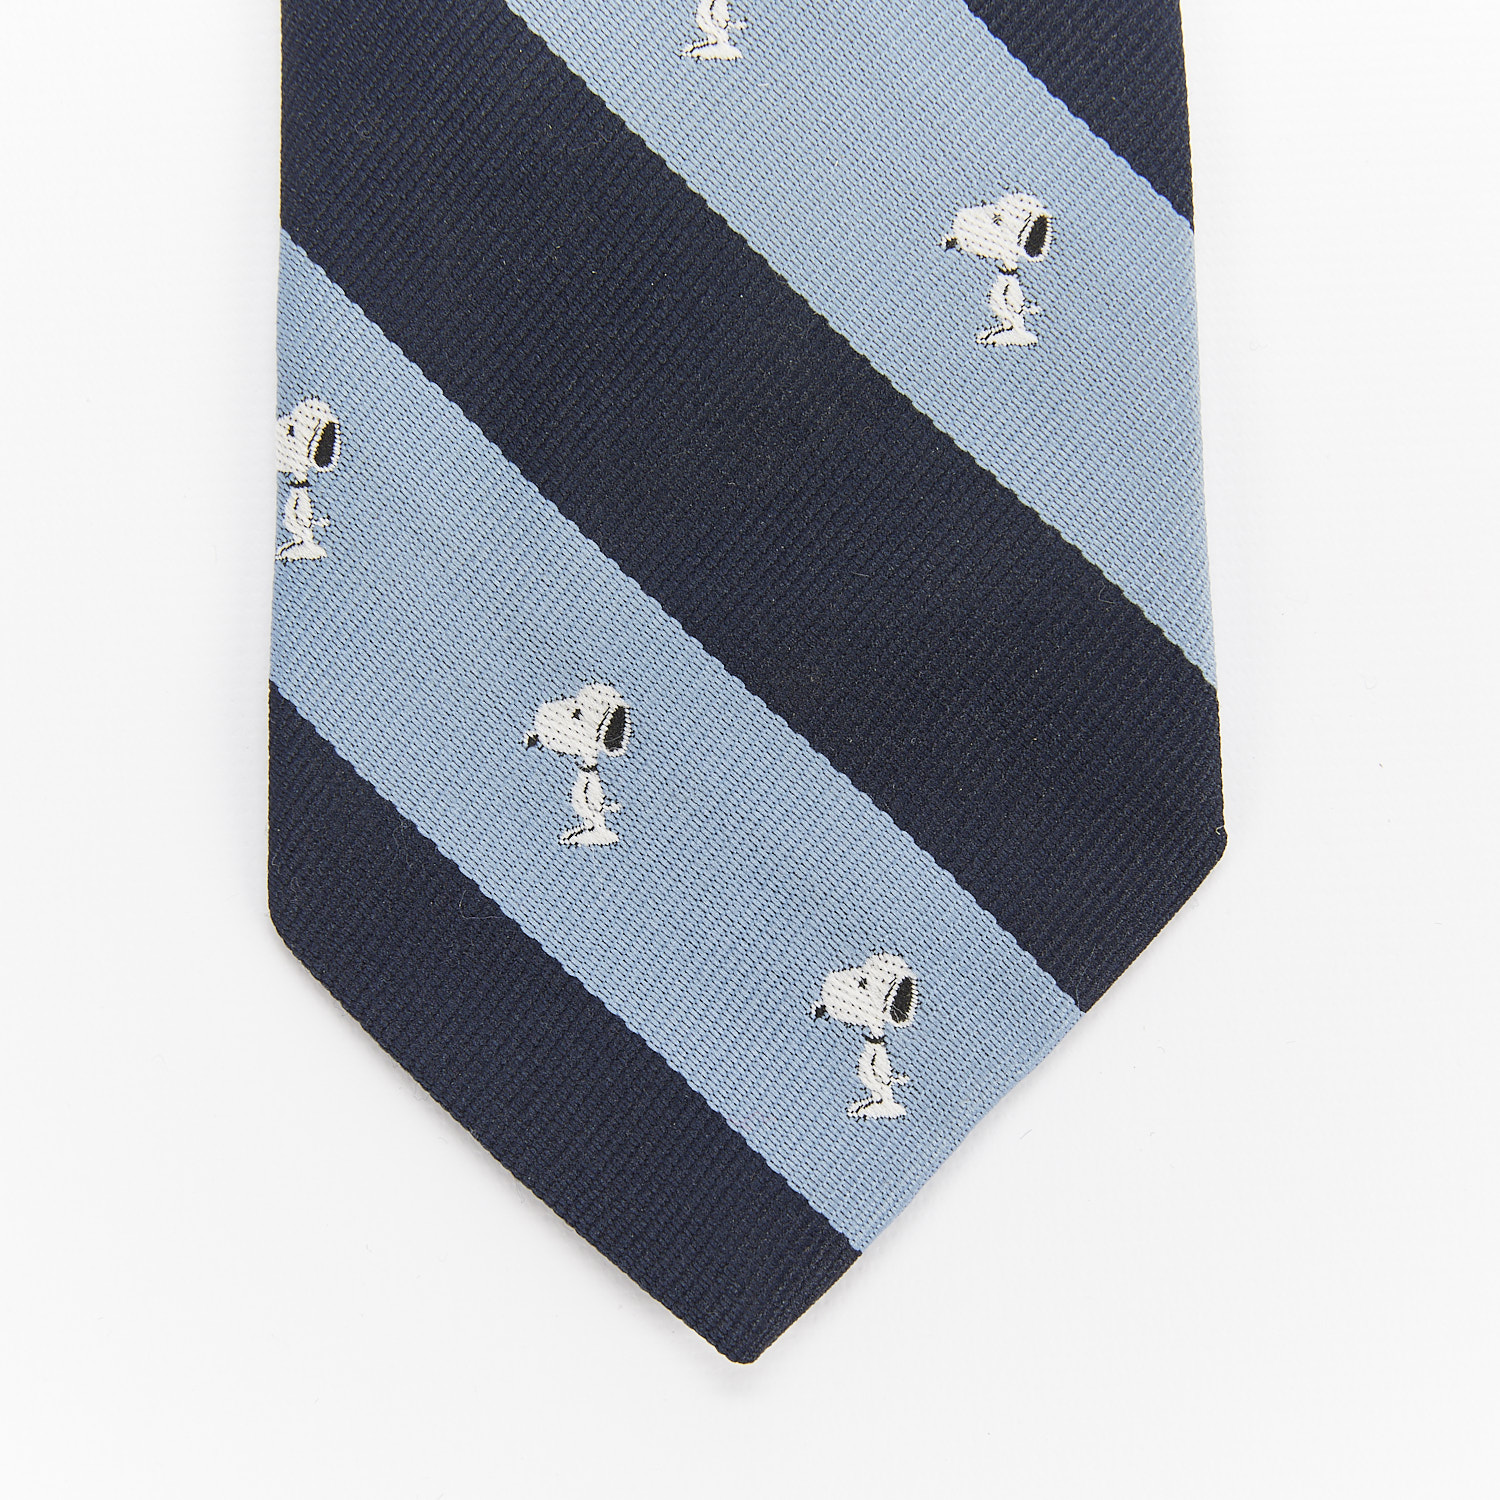 3 Ties of Snoopy - Striped & Space Themed - Image 3 of 10